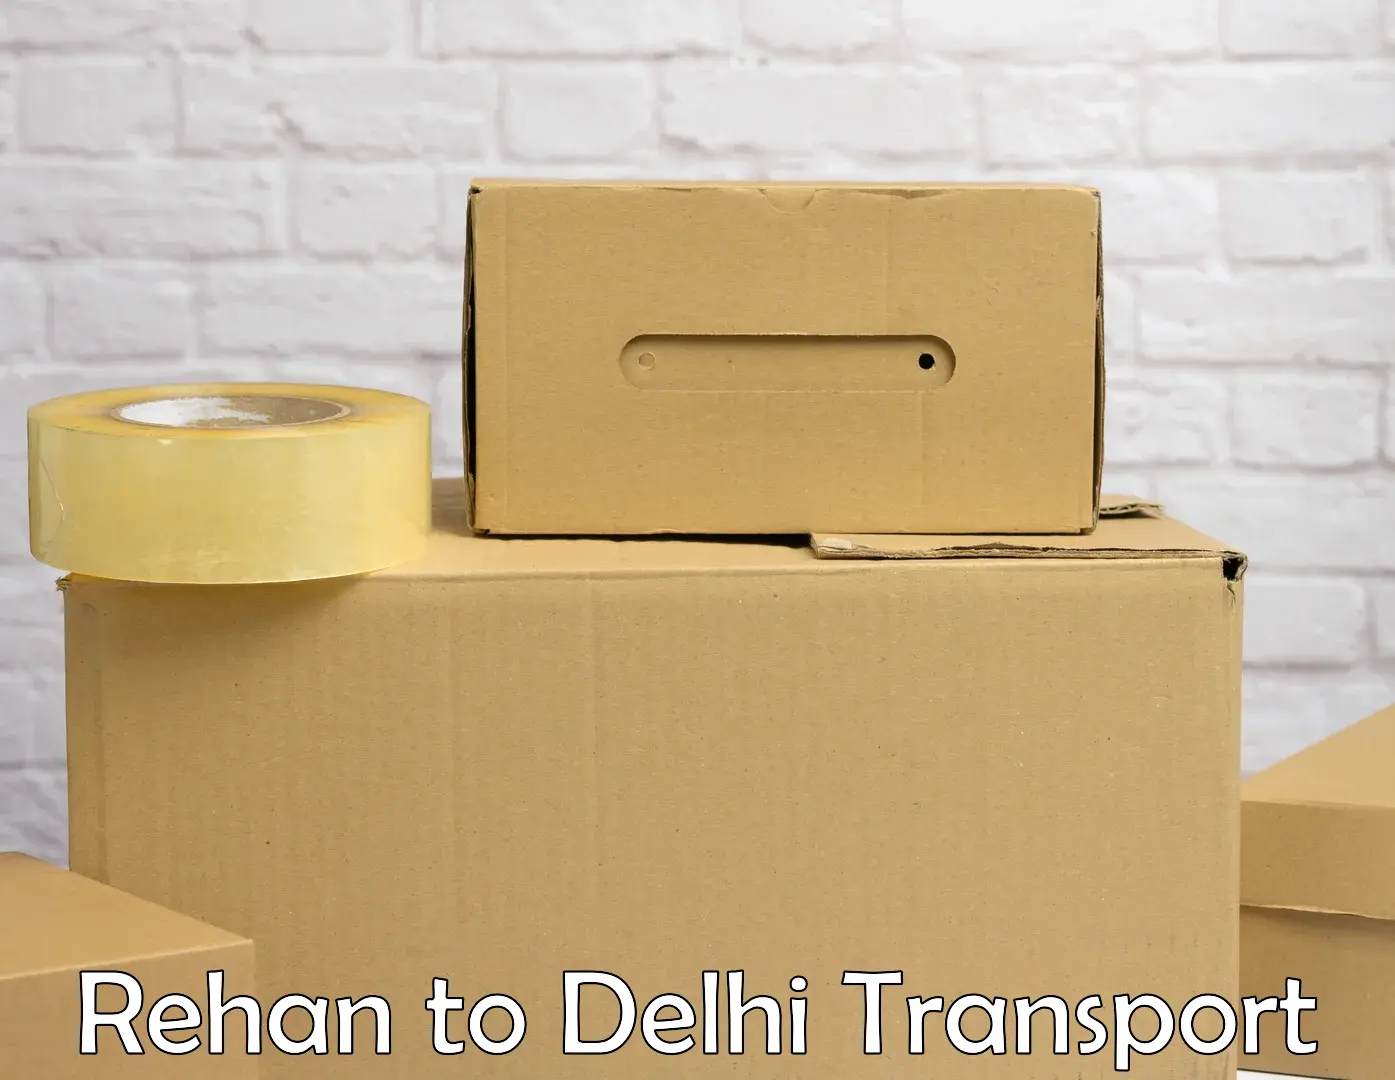 Transport bike from one state to another Rehan to Delhi